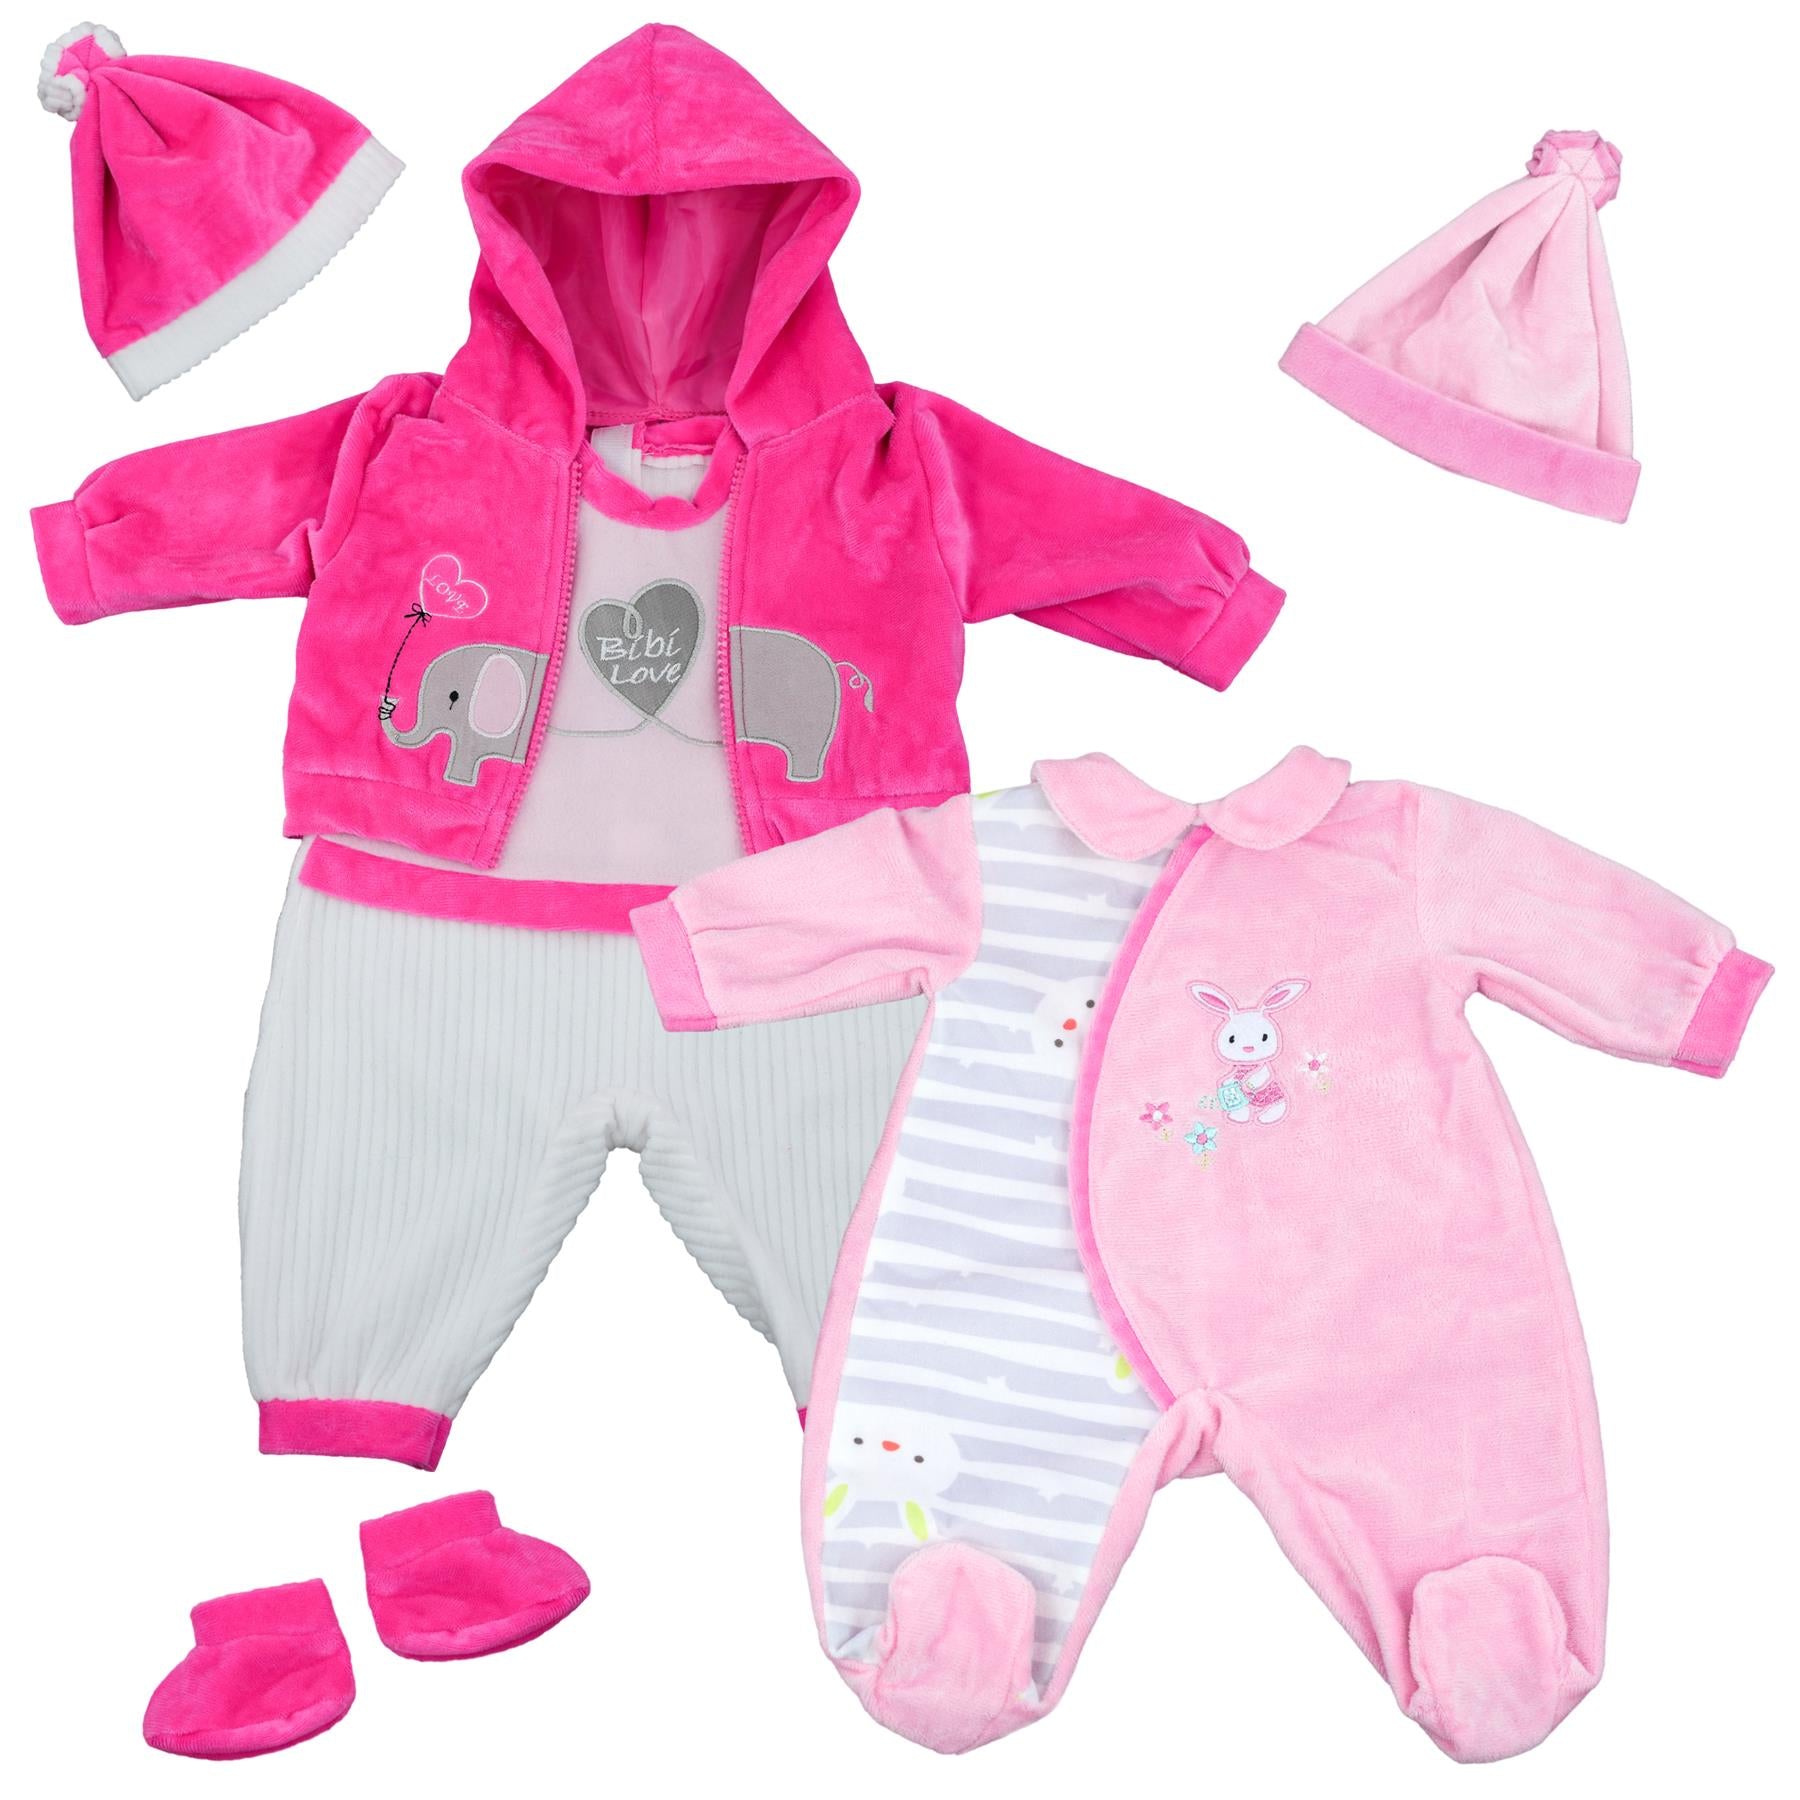 Baby Doll Clothes Set Of Two by BiBi Doll - UKBuyZone